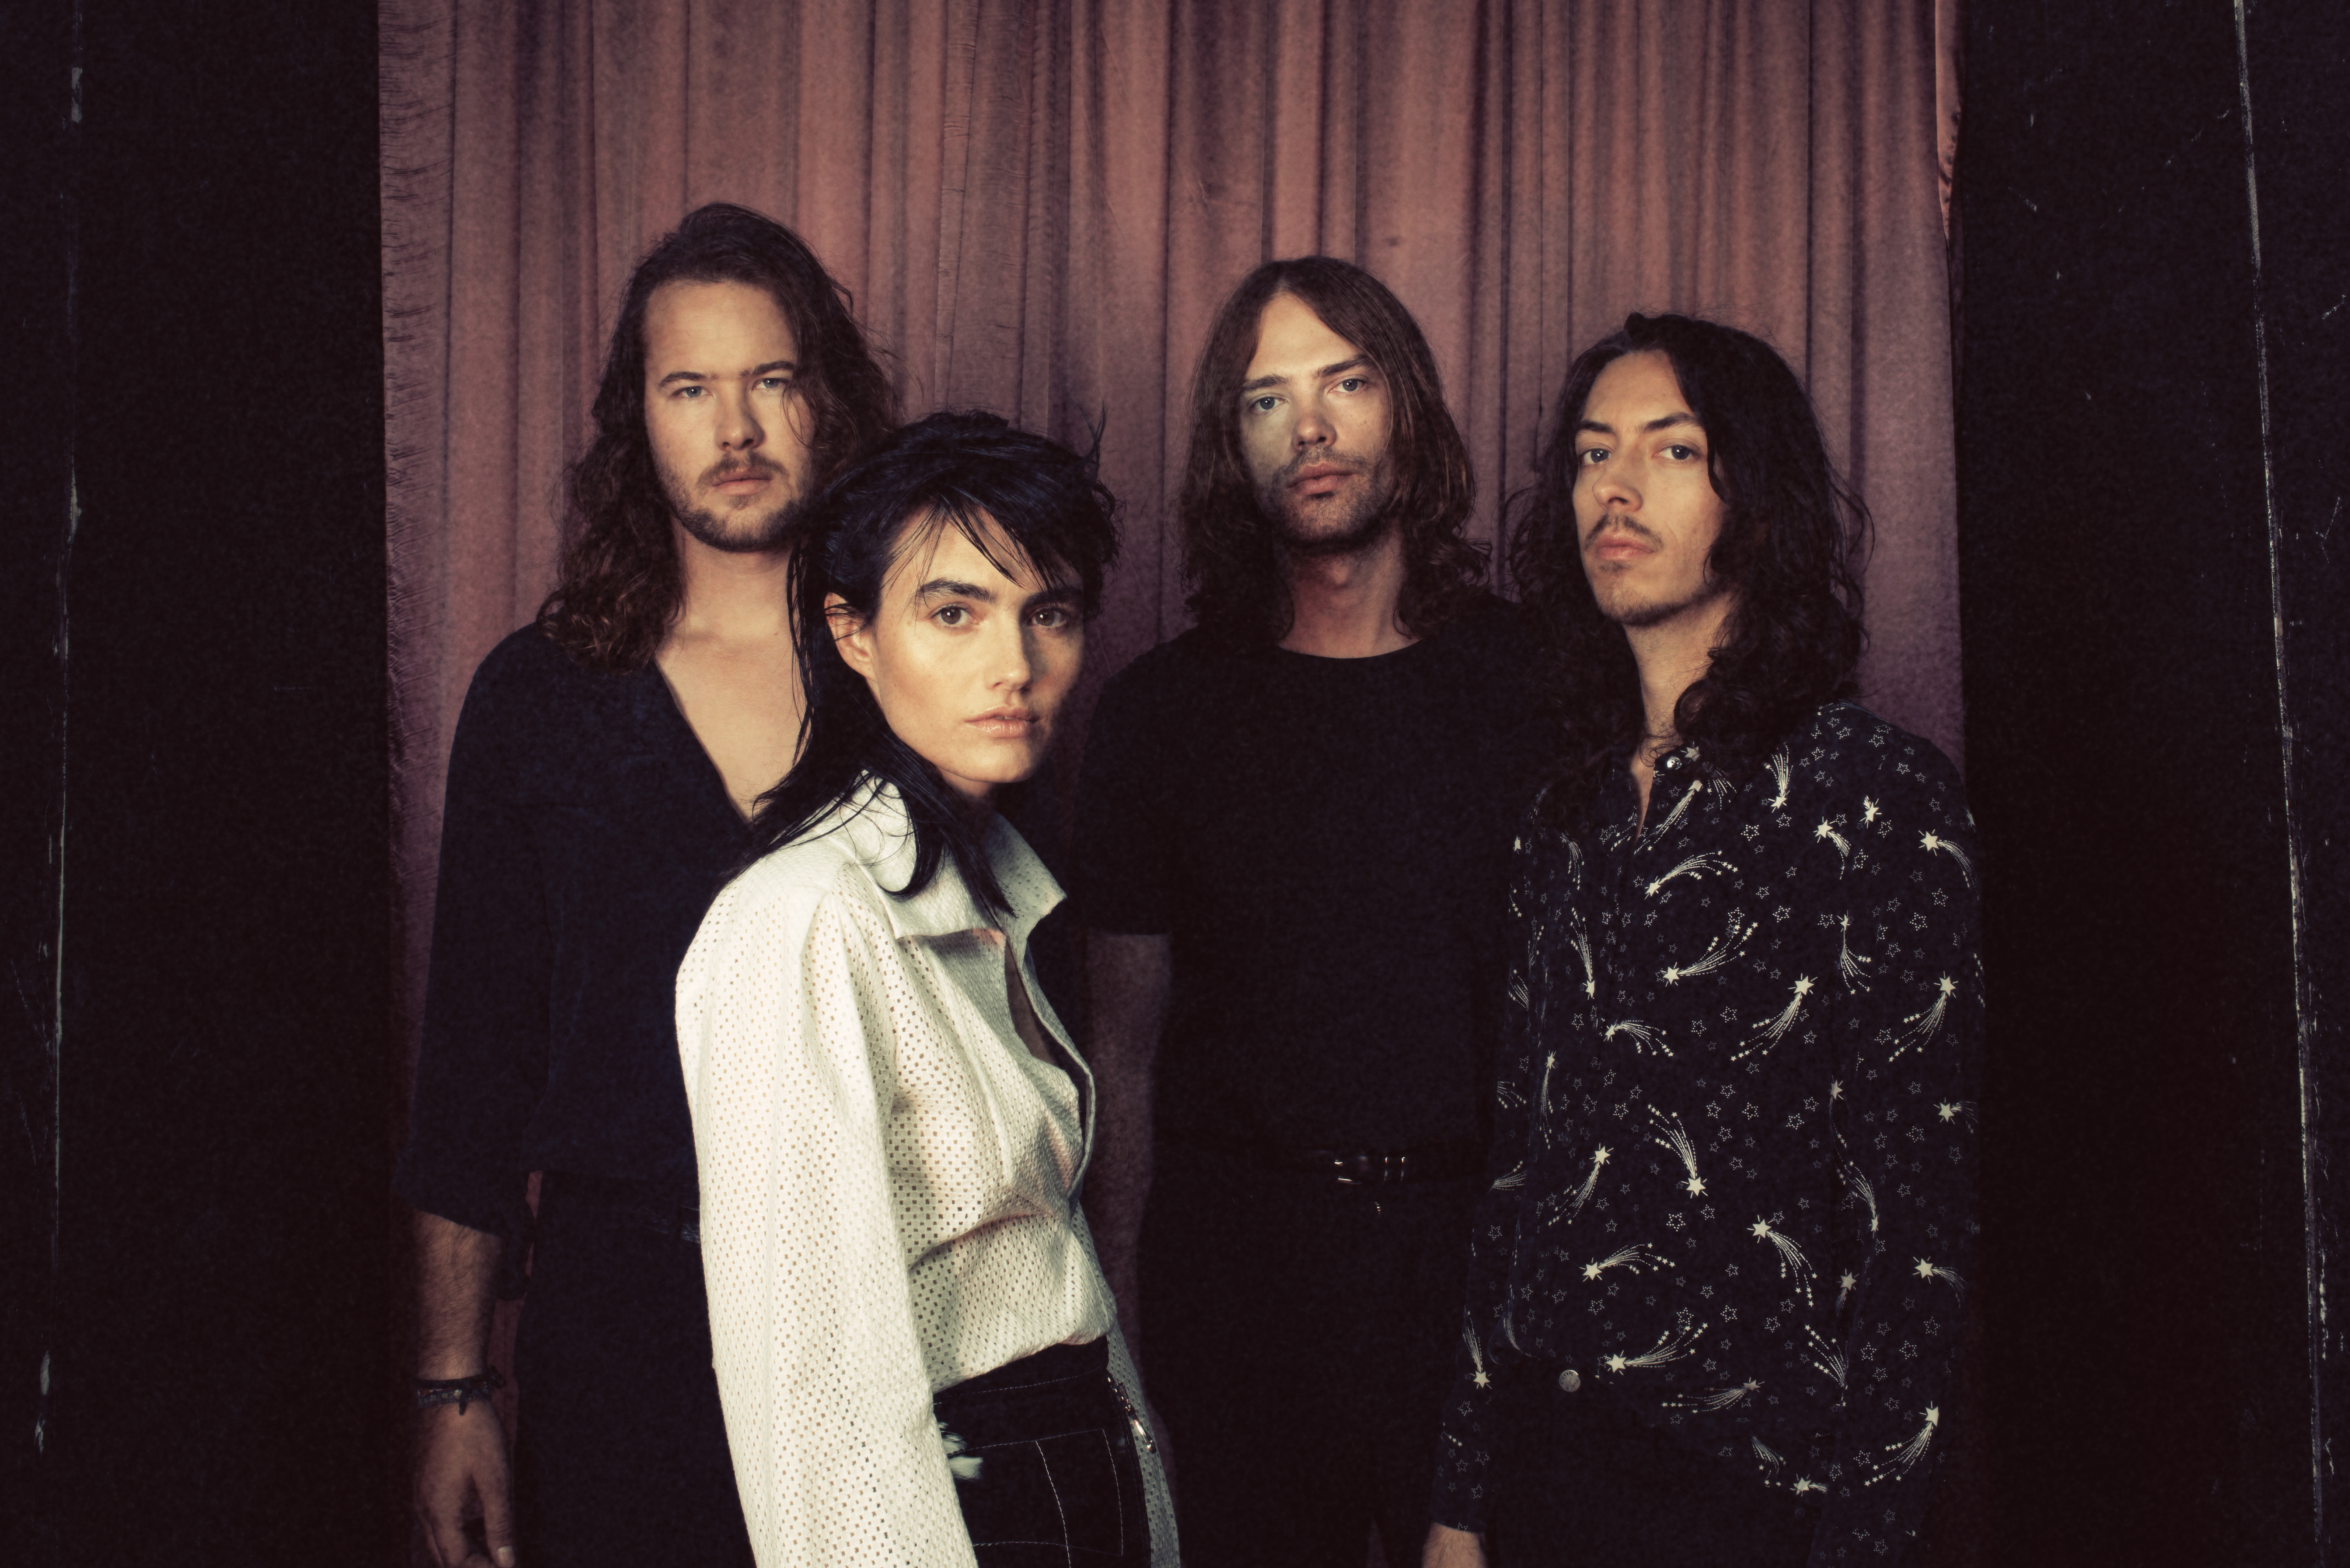 Our interview with The Preatures